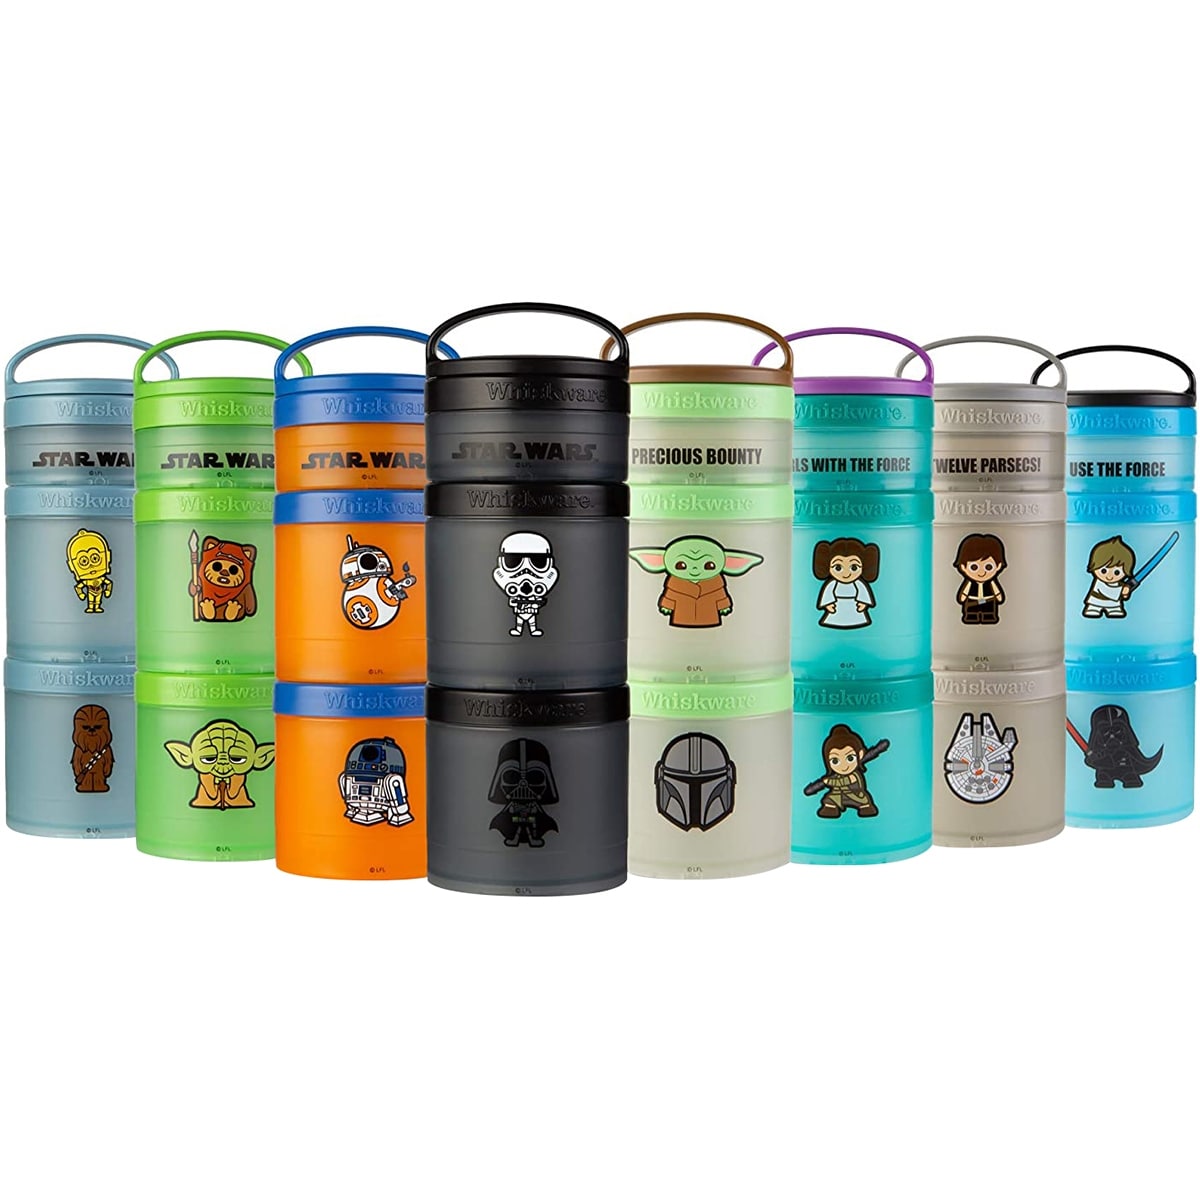 https://ak1.ostkcdn.com/images/products/is/images/direct/98cc8a981b0c93897e8cdd2c09358f1cc4e79a28/Whiskware-Star-Wars-Stackable-Snack-Pack-Containers.jpg